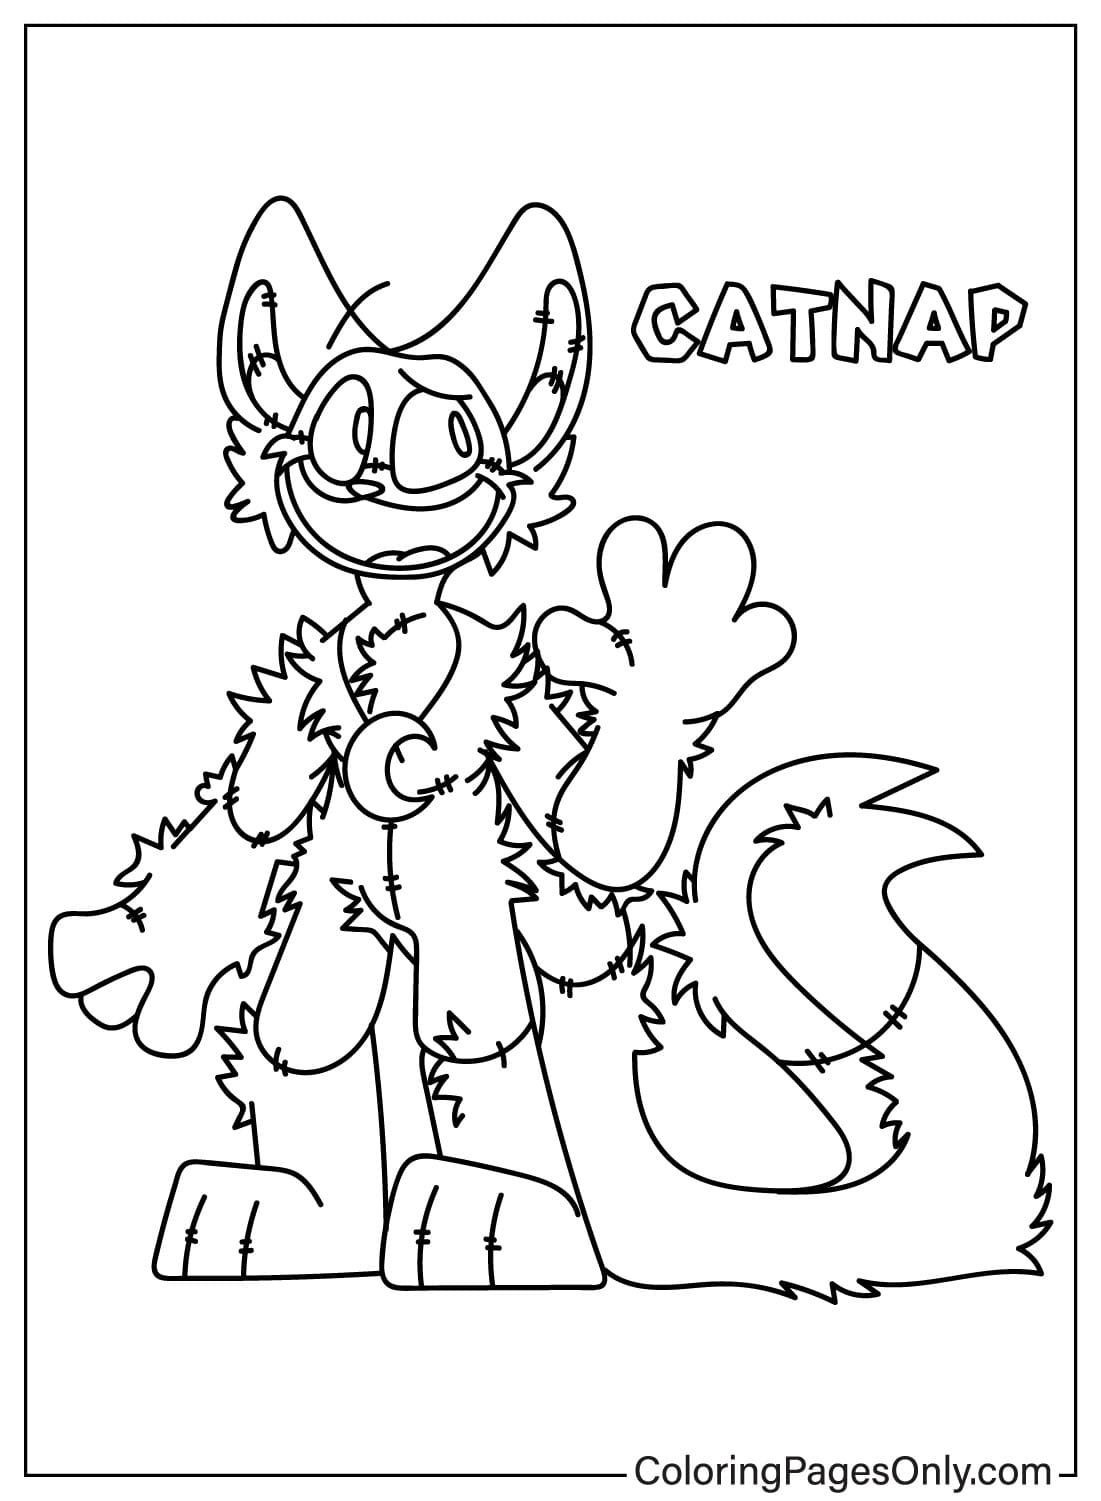 CatNap Coloring Page from CatNap